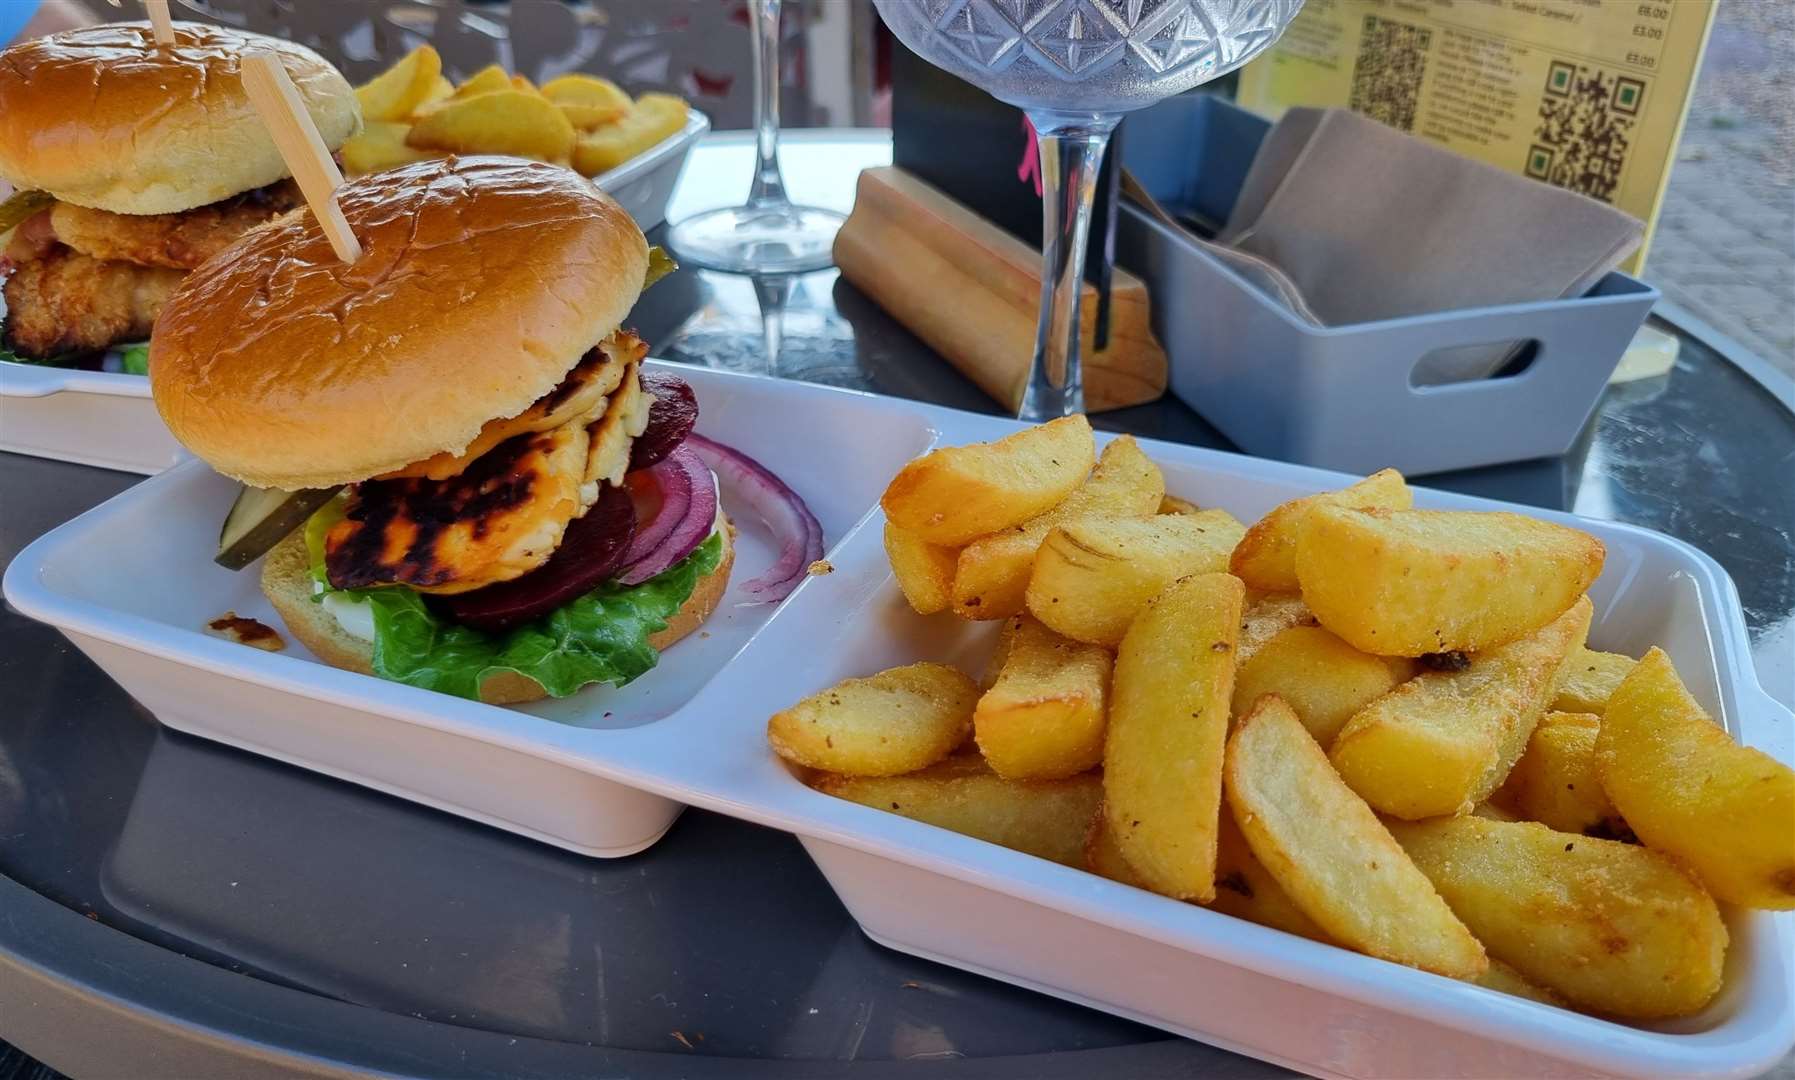 The halloumi burger and fries were delicious